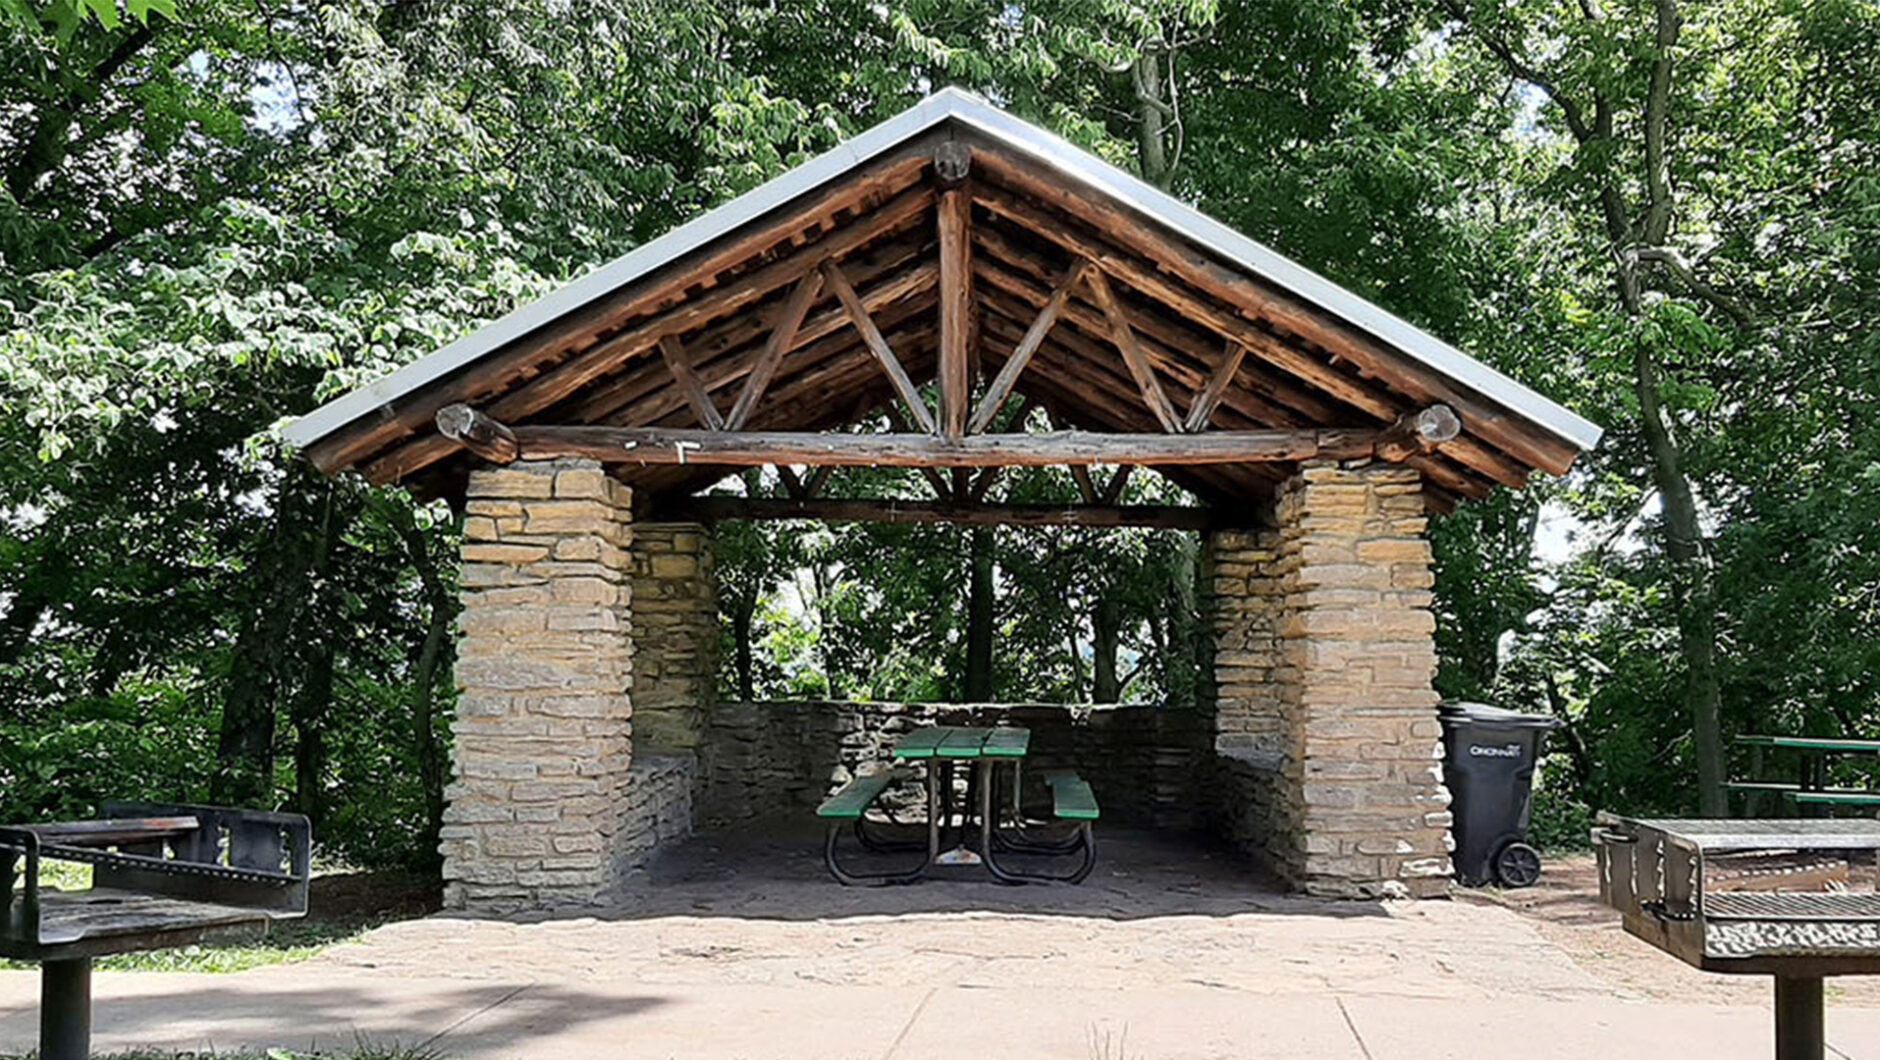 A picnic shelter at Alms park with picnic tables and grills